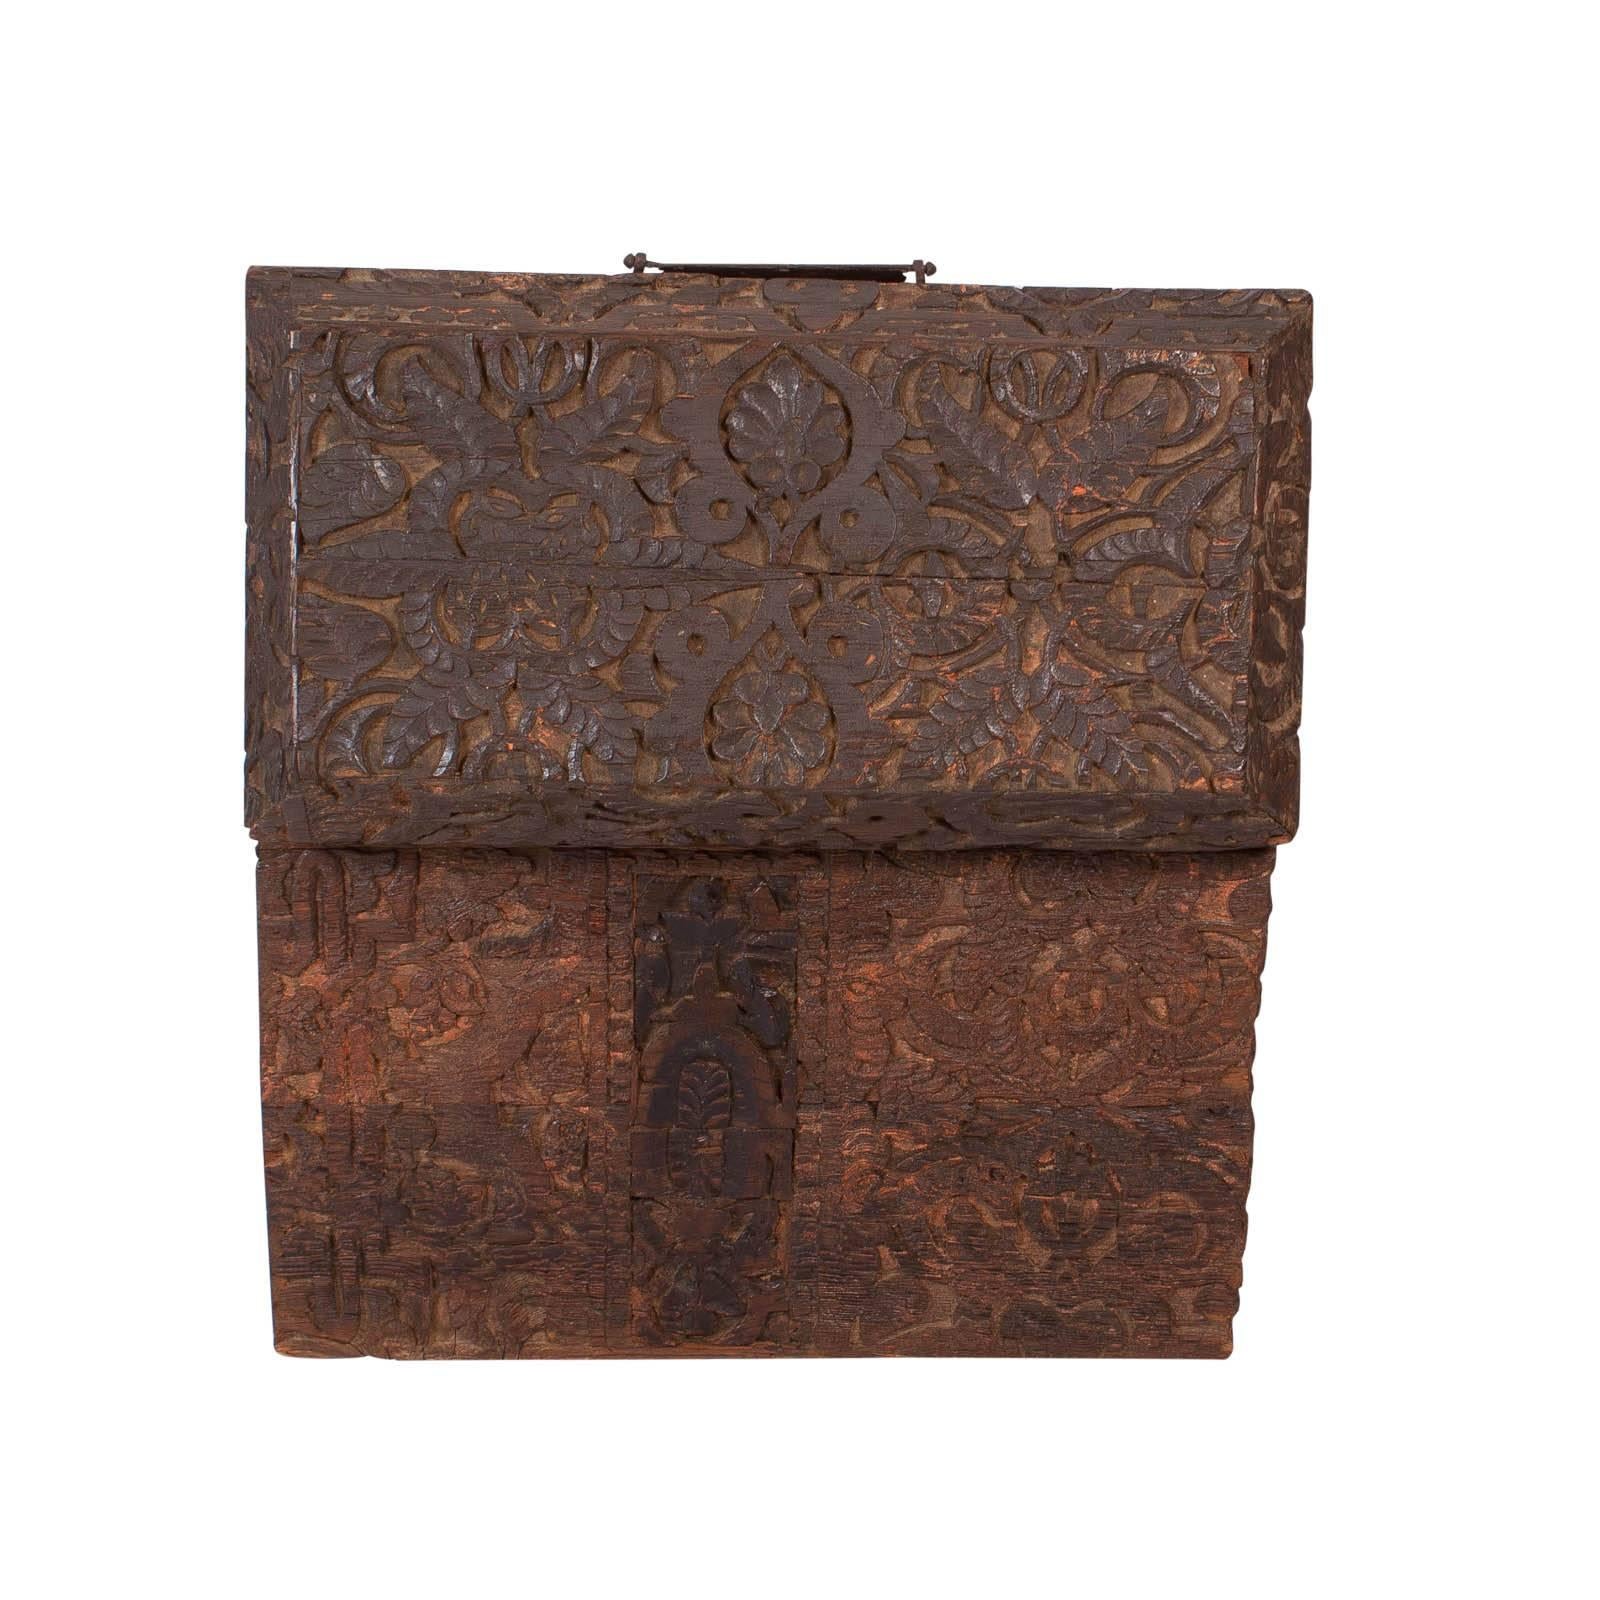 19th Century Large Deeply Carved Indo-Persian Trunk, circa 1800